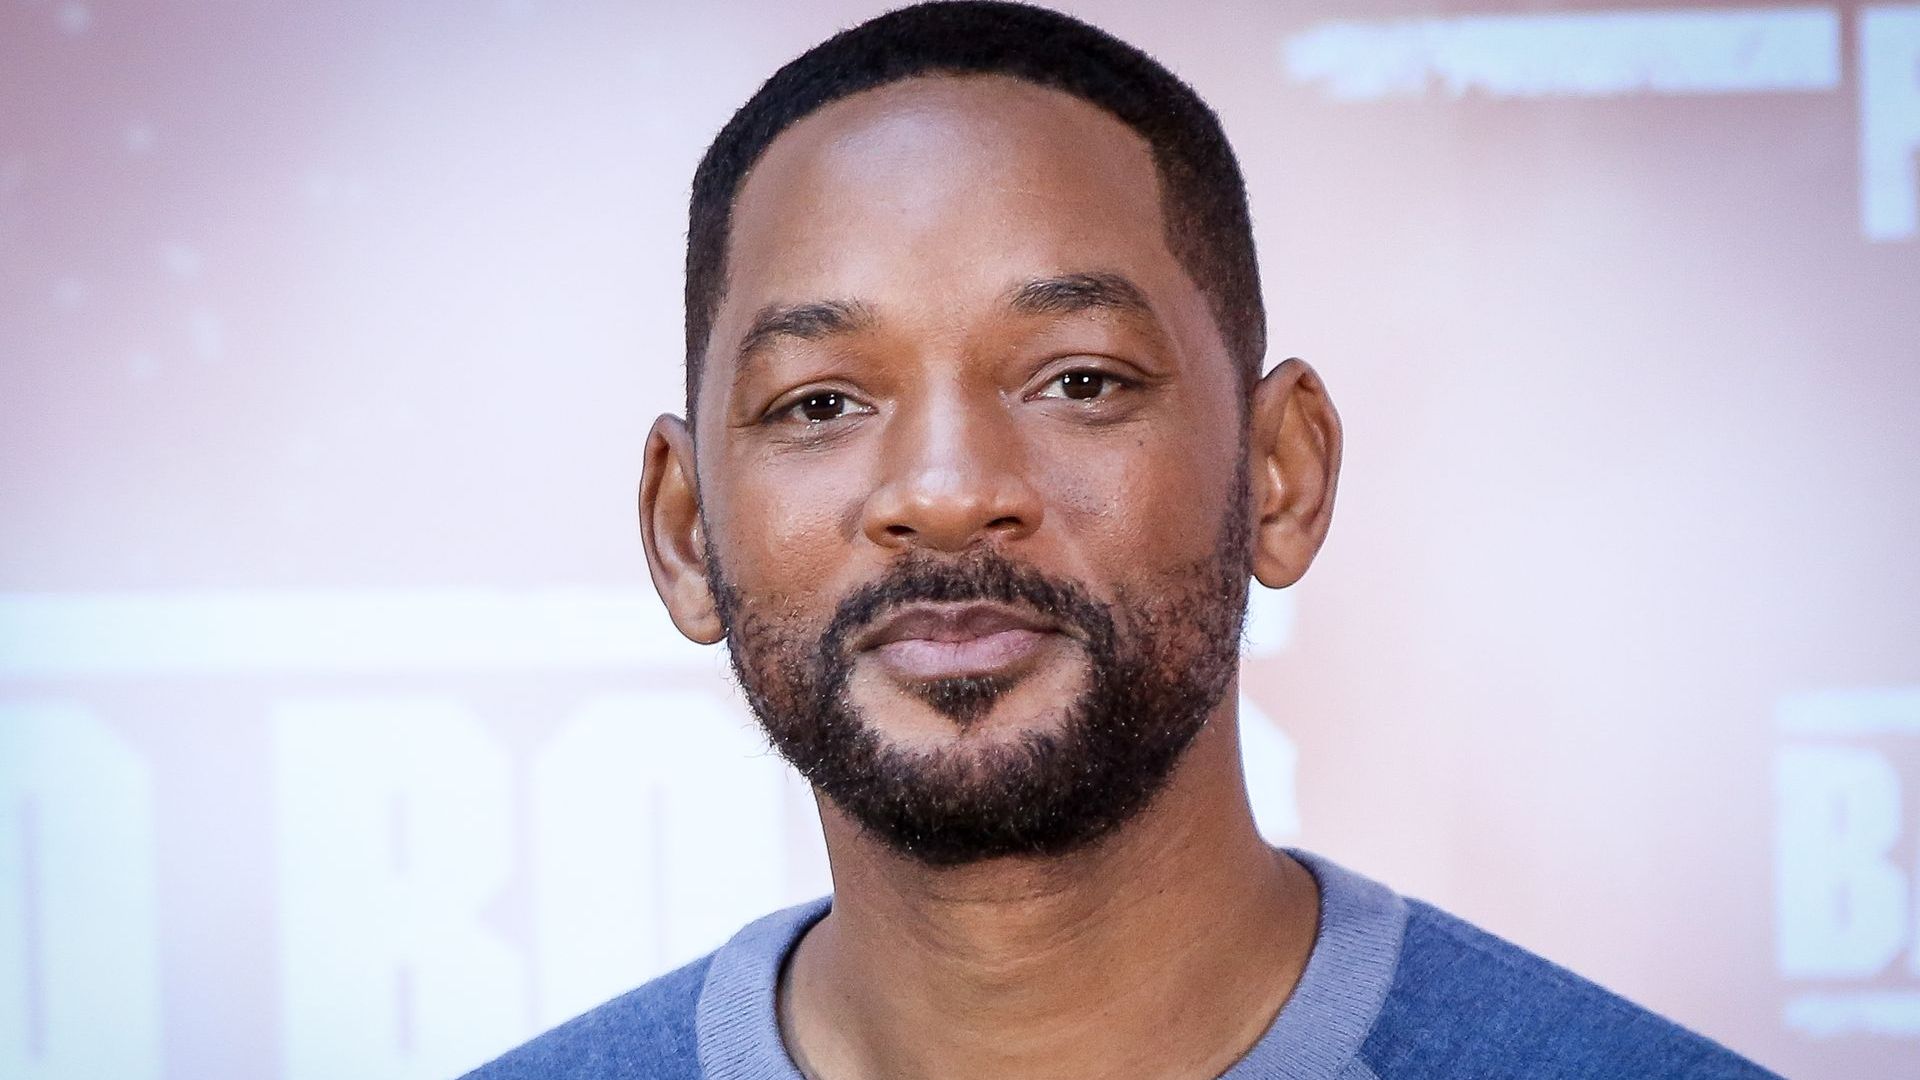 Will Smith Vividly Recounts Mom Catching Him Having Sex with Girlfriend in Kitchen Complex image